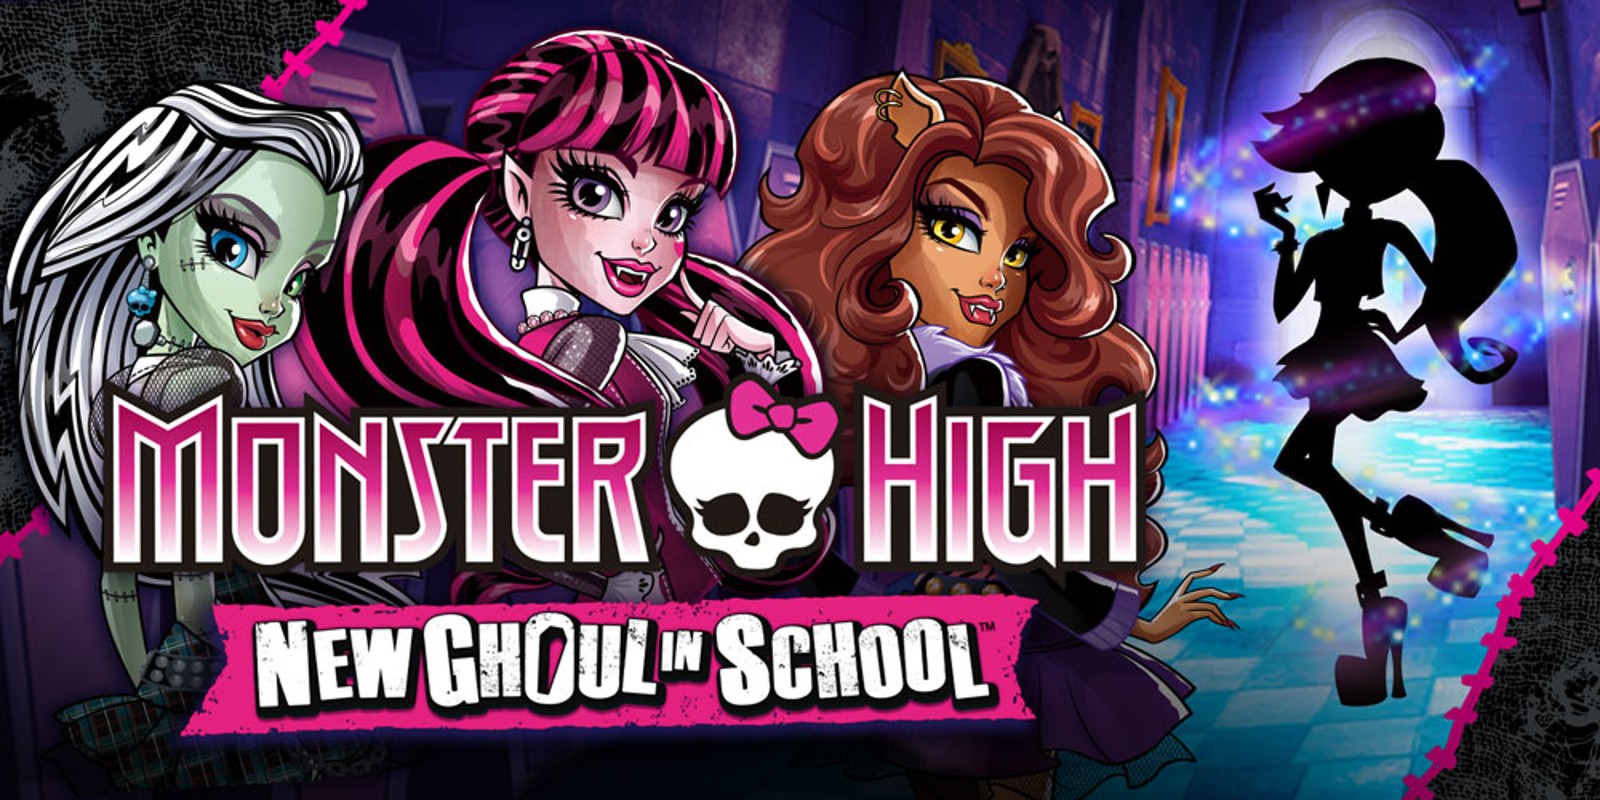 monster high new ghoul in school 3ds